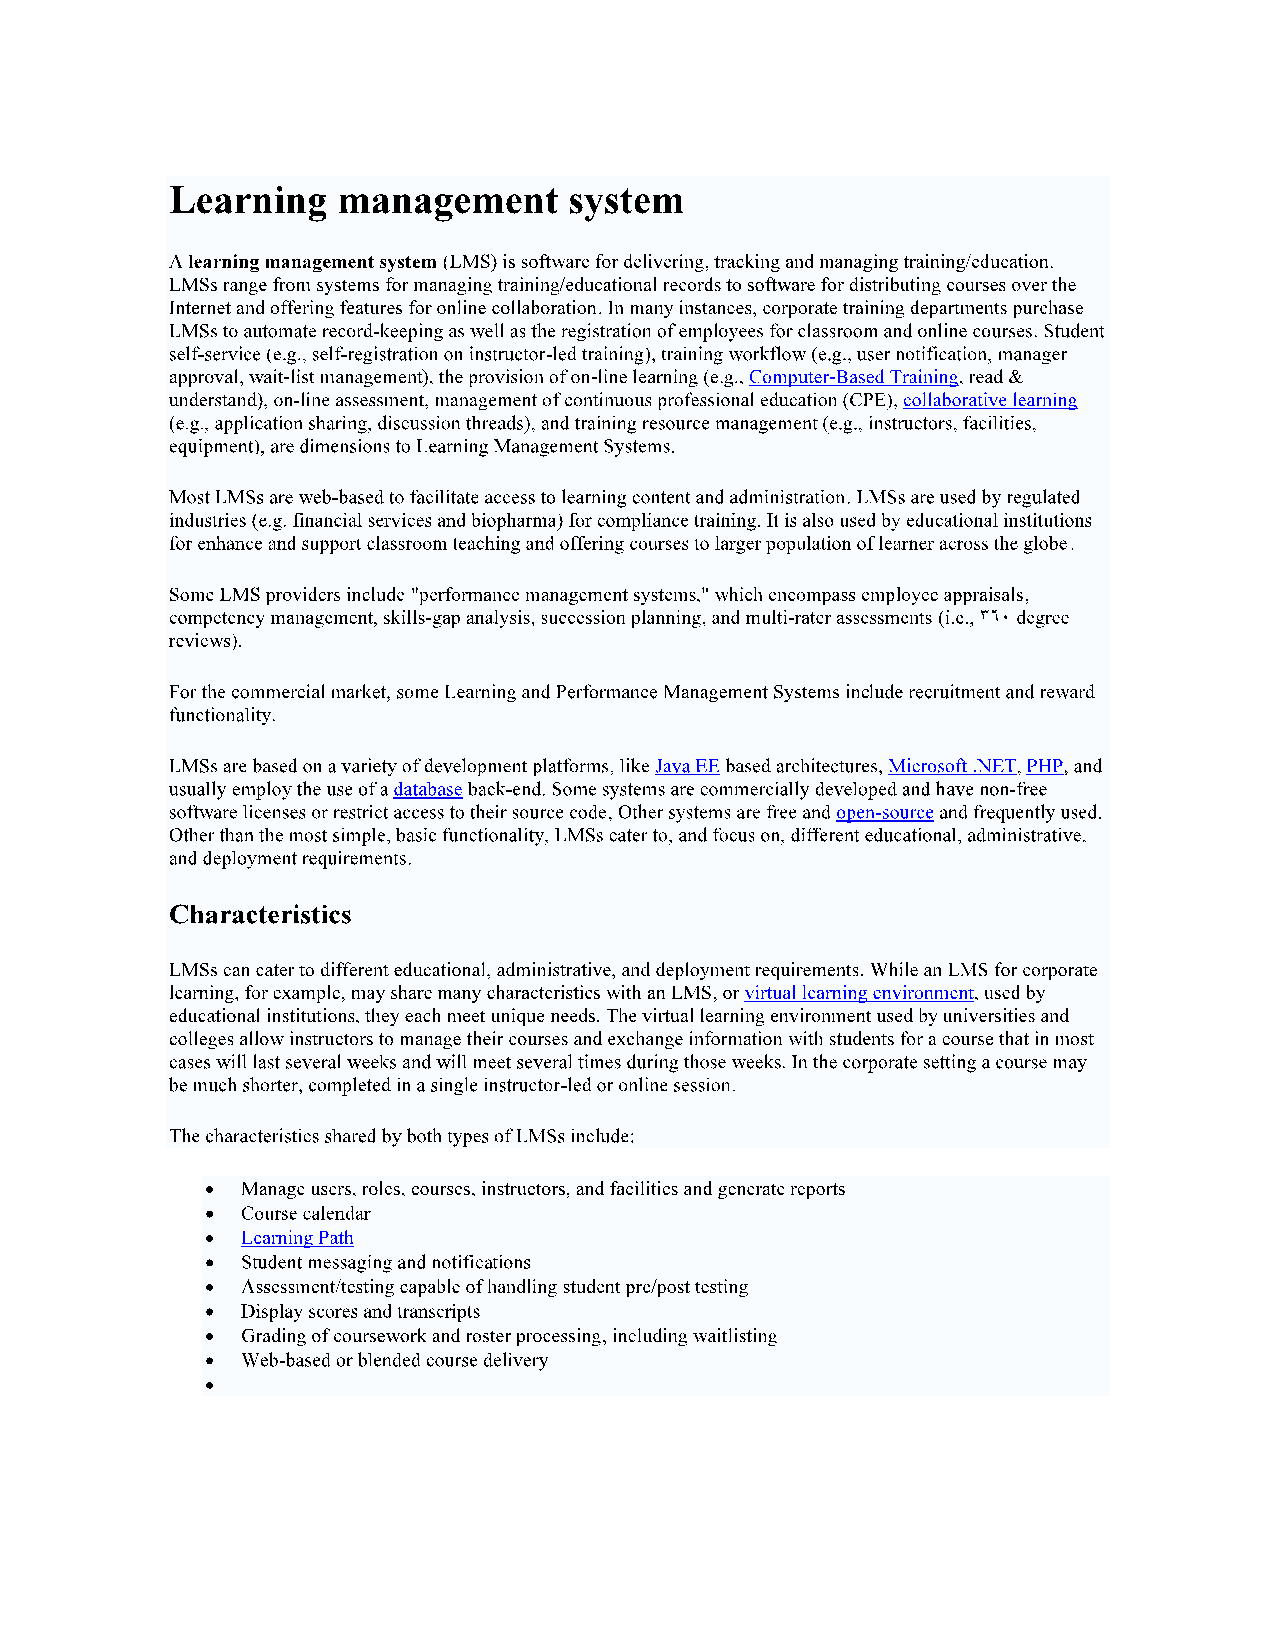 Learning management system2